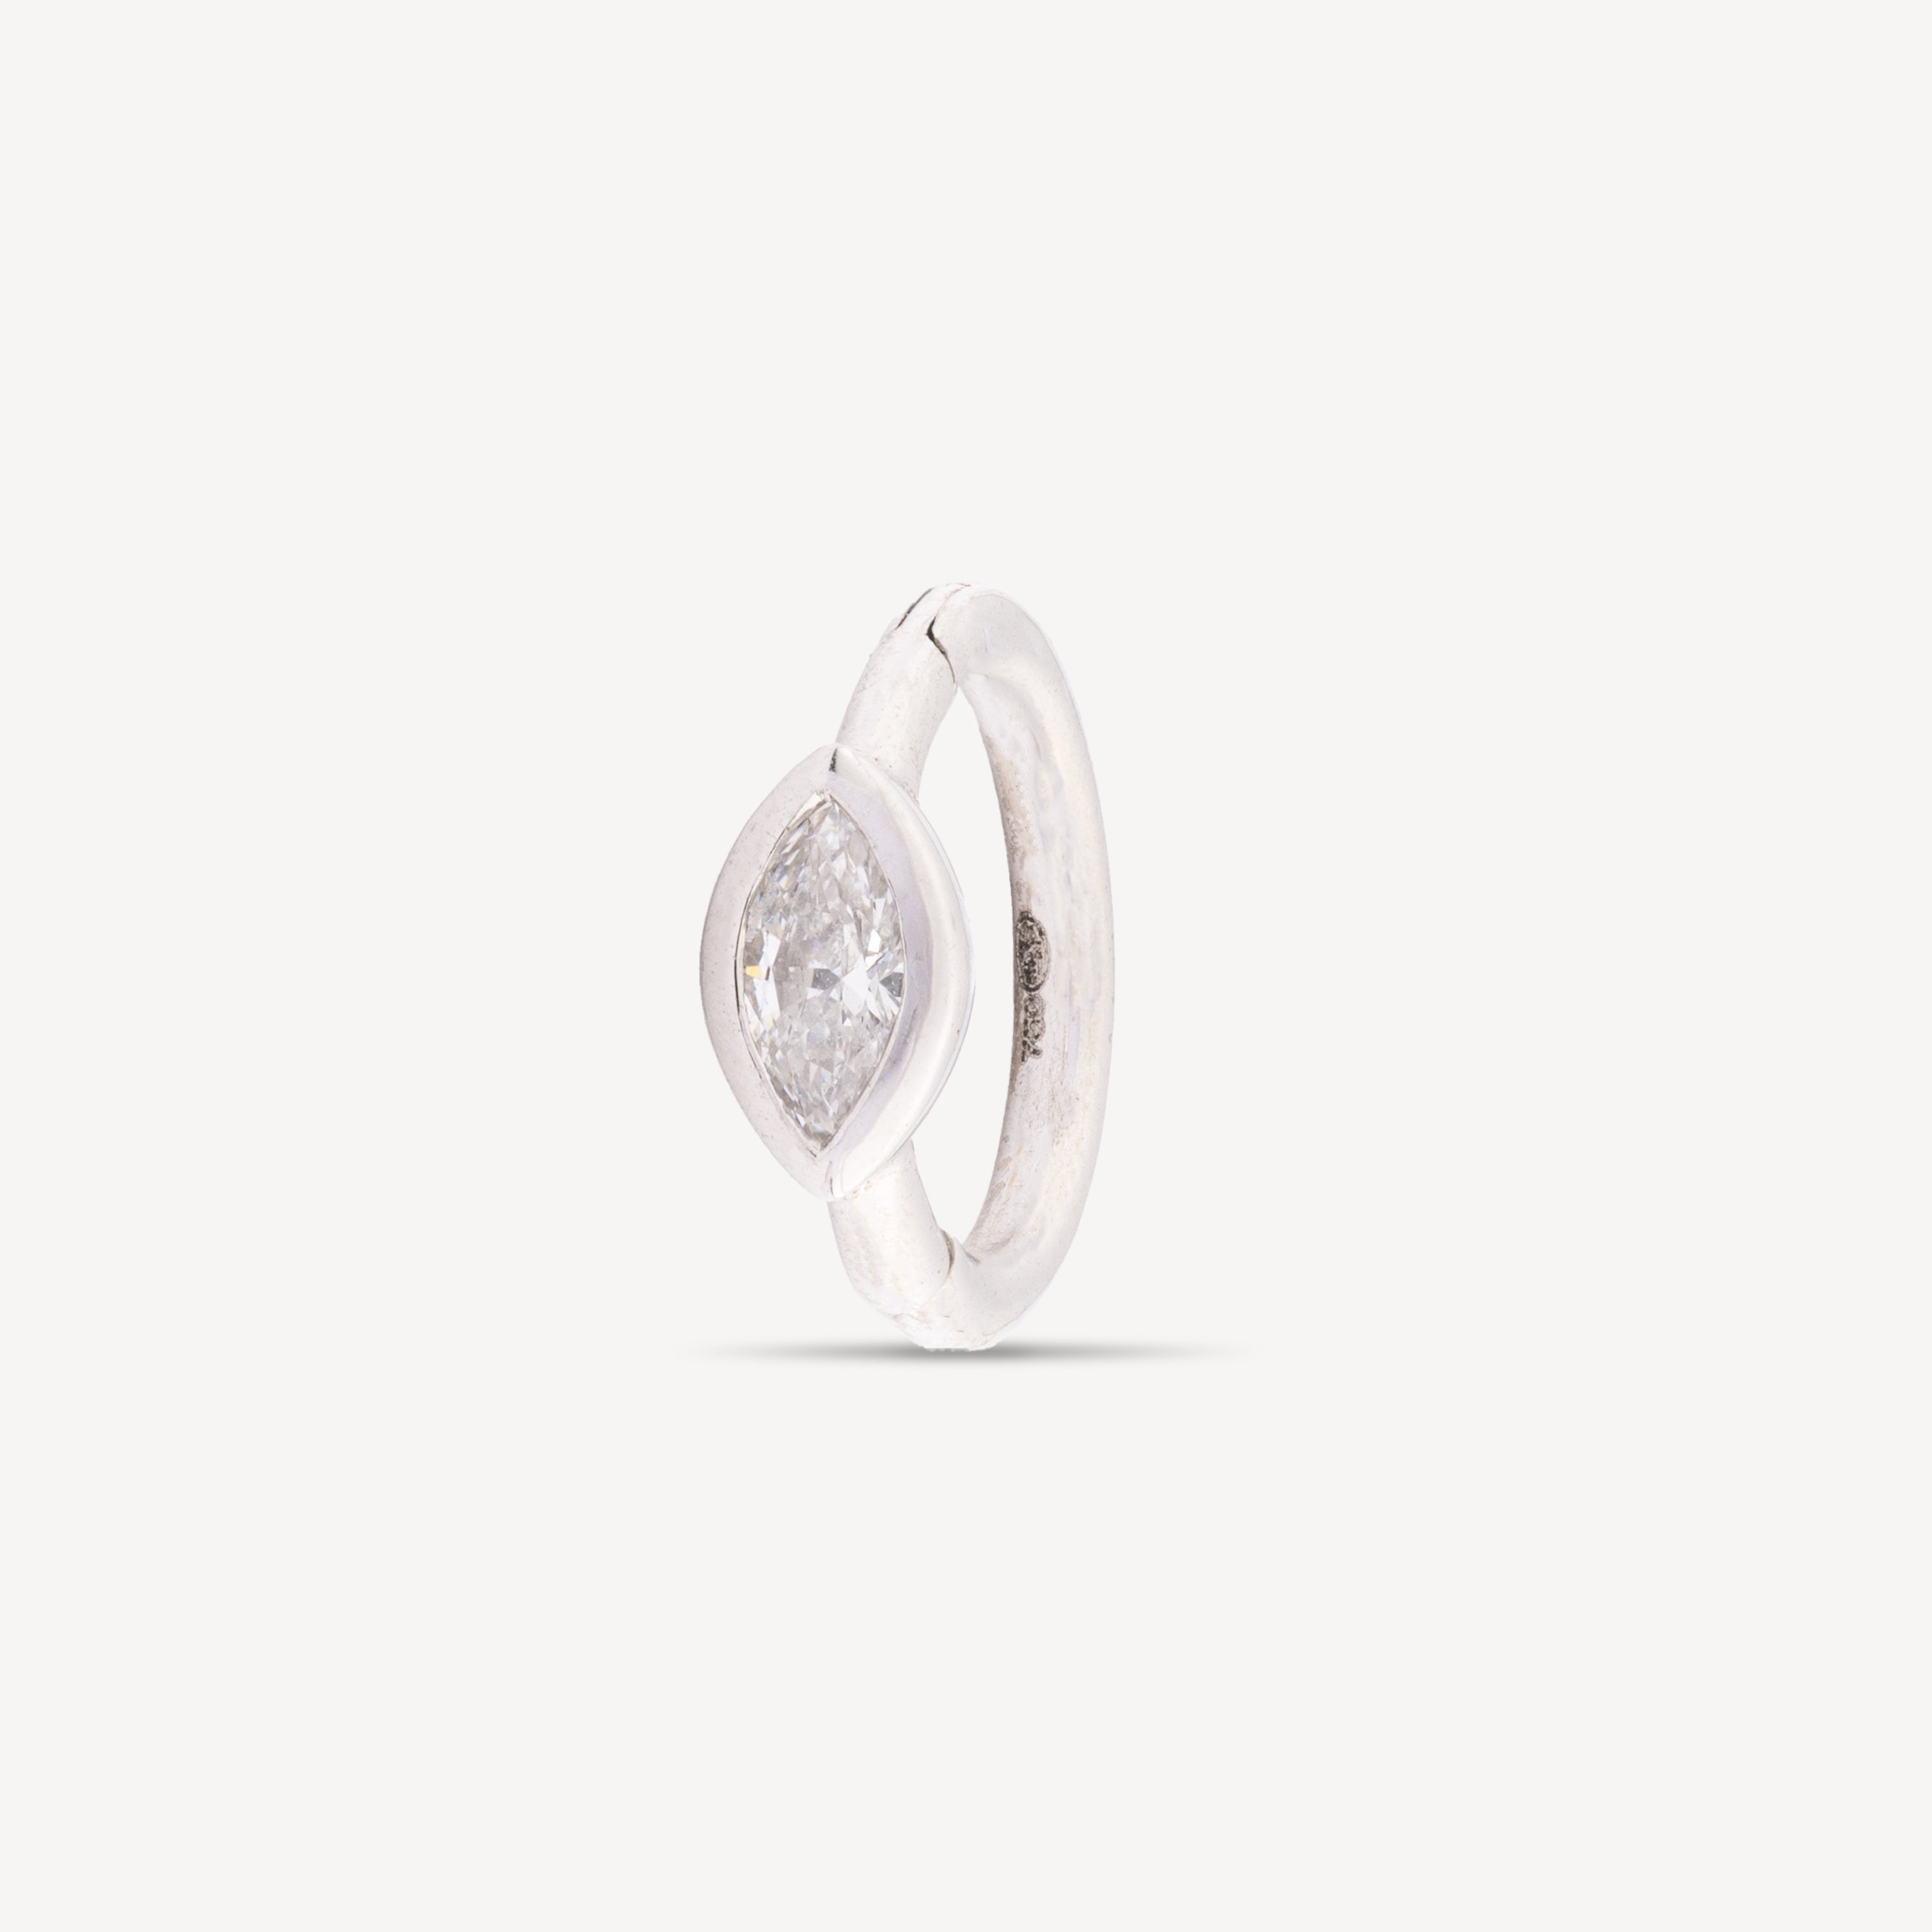 Creole 6.5mm white gold marquise 3x2mm bezel set